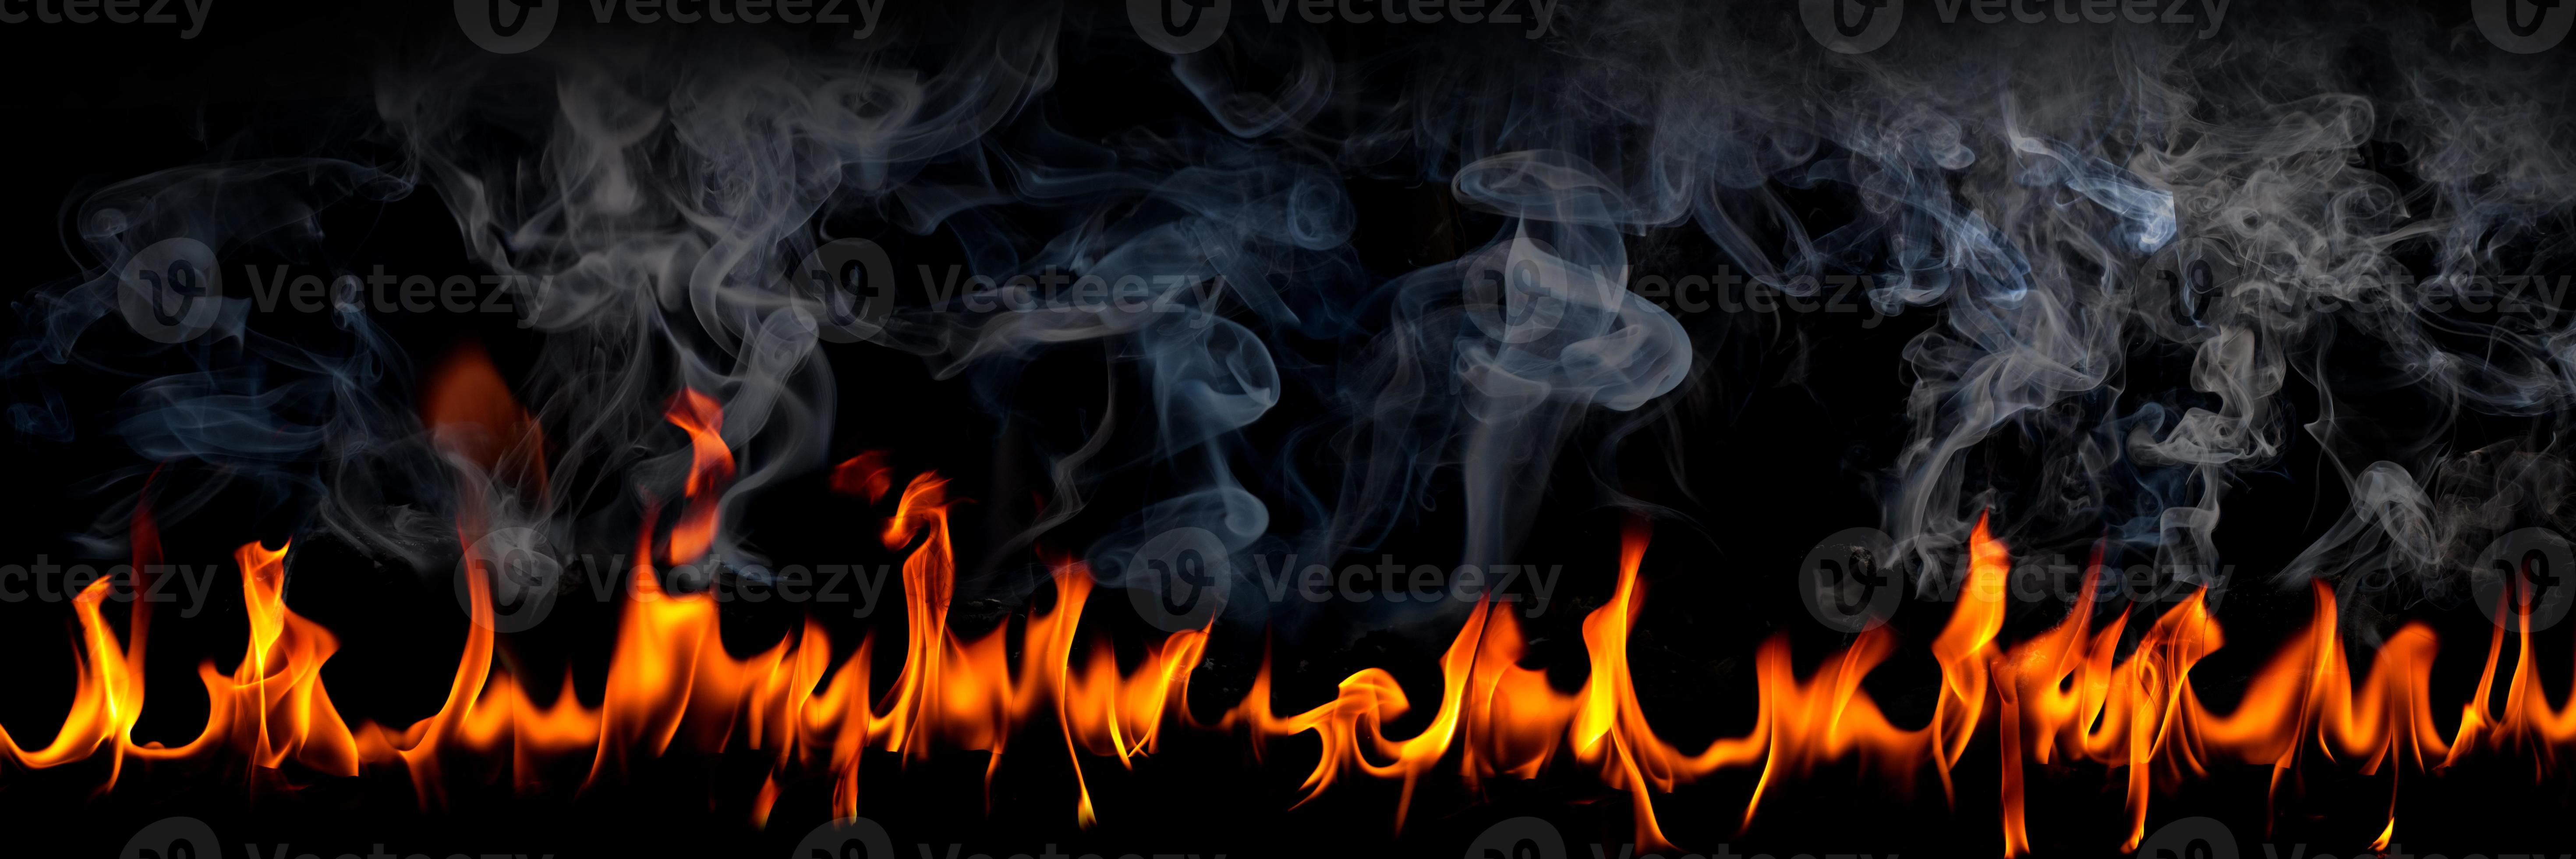 1000 Free Black Fire  Fire Images  Pixabay